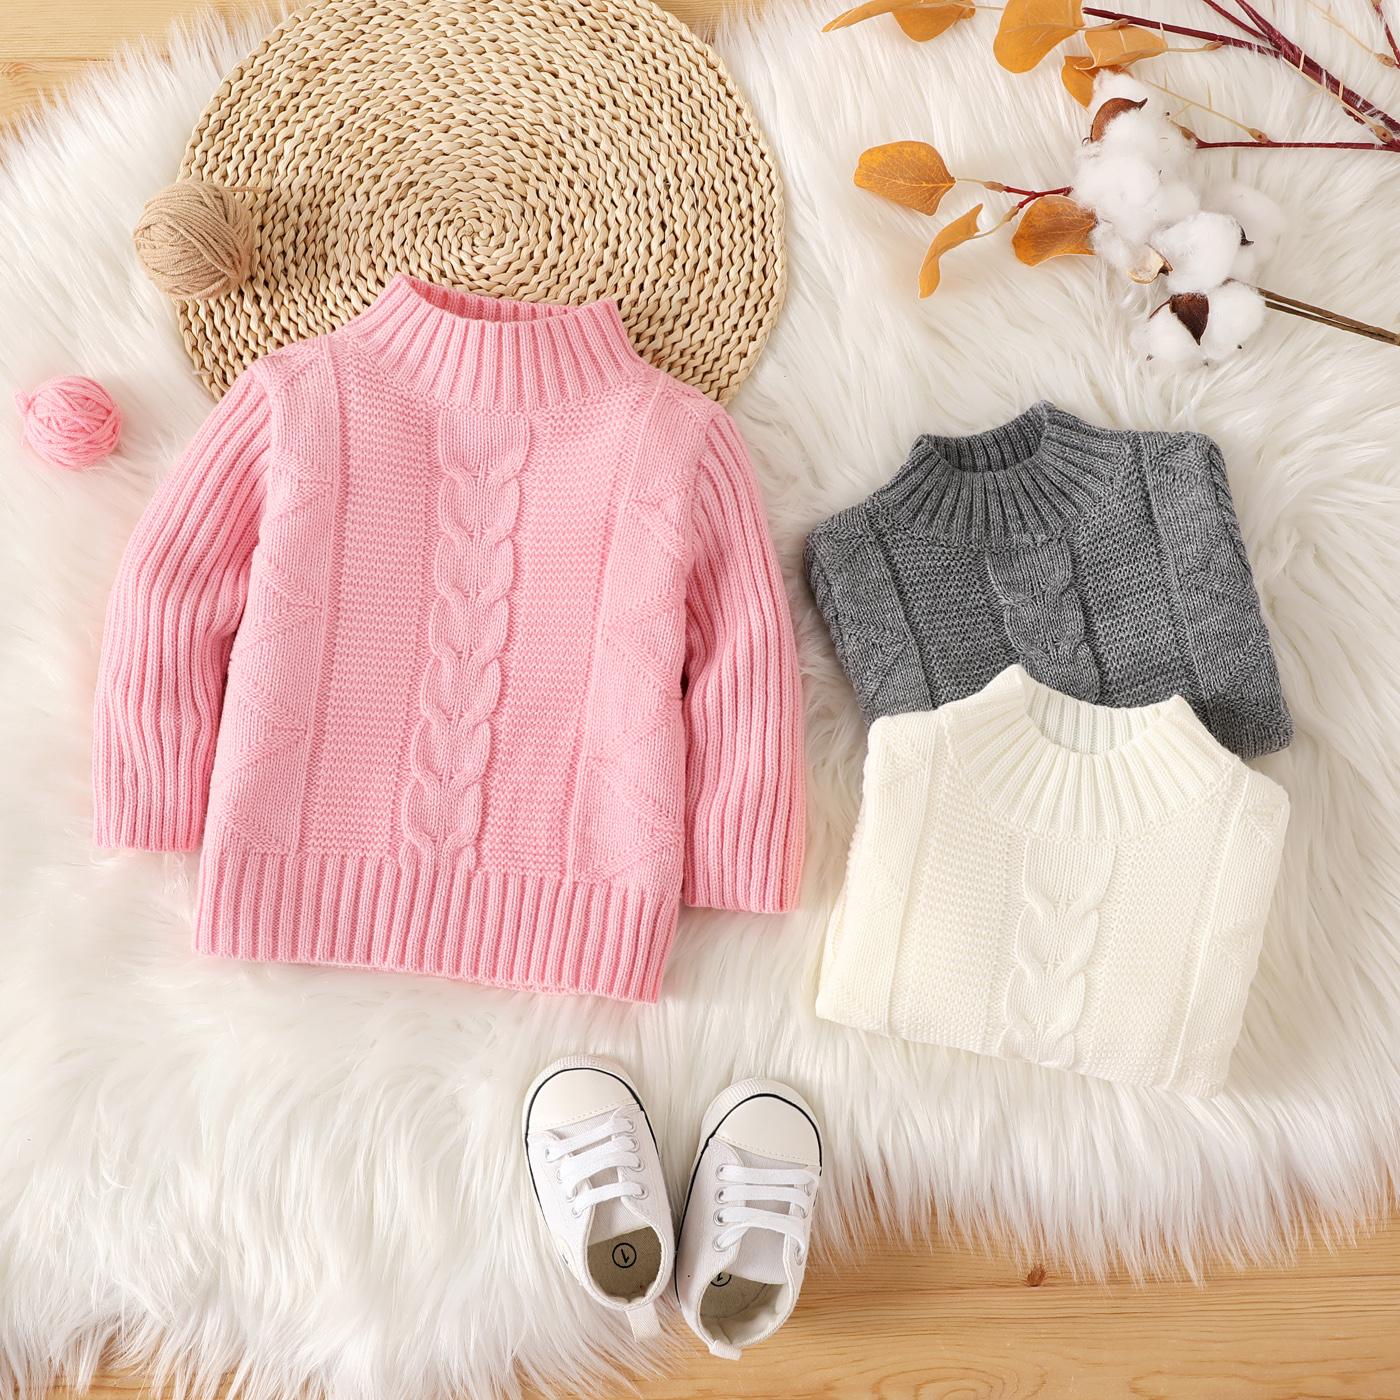 Toddler Girl Sweet Heart-shaped Top/Sweater – PatPat Wholesale